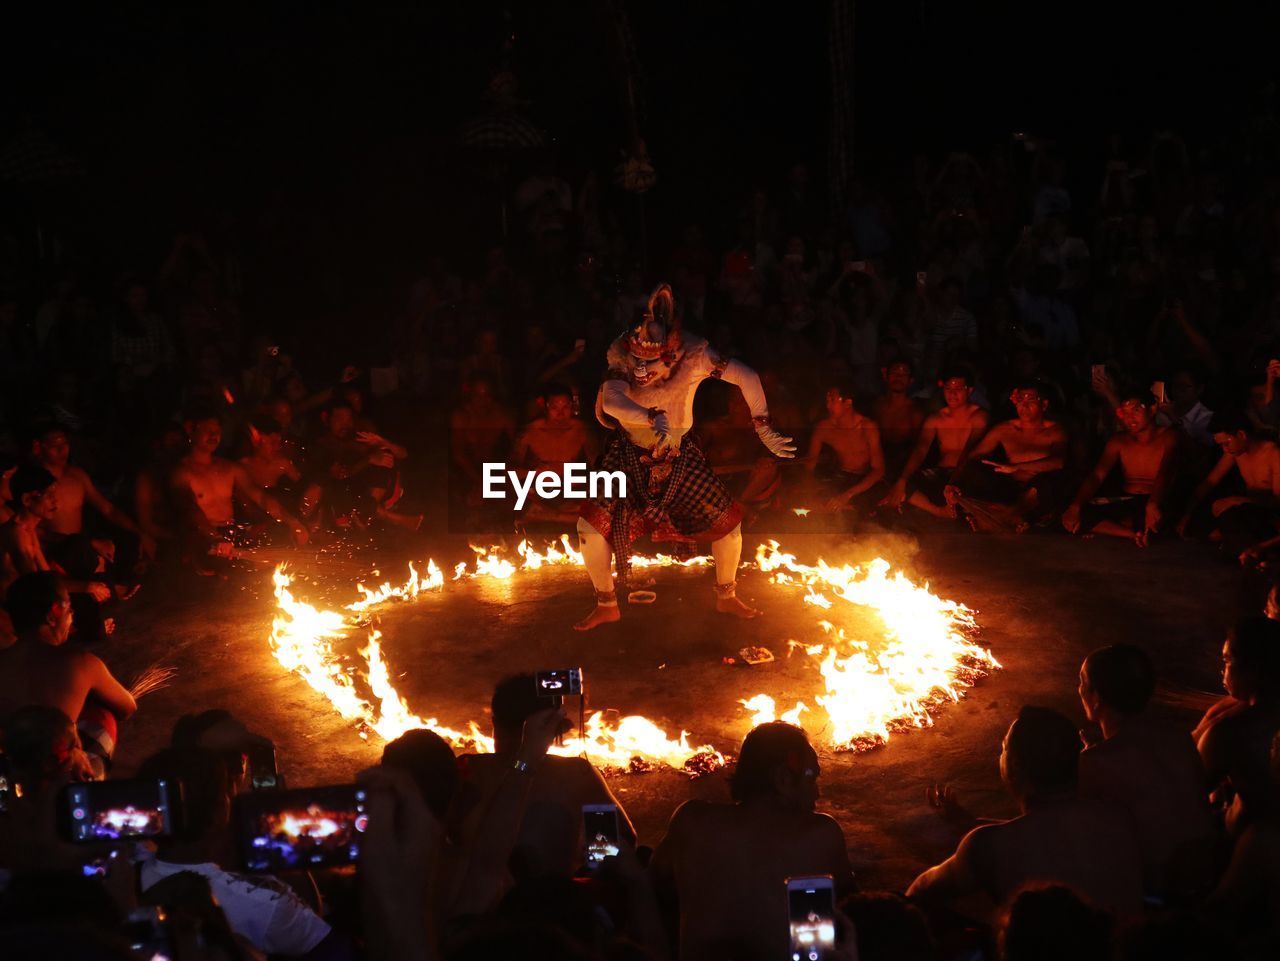 crowd, group of people, large group of people, night, campfire, heat, burning, bonfire, fire, flame, men, performance, nature, arts culture and entertainment, event, adult, performance art, lifestyles, enjoyment, women, outdoors